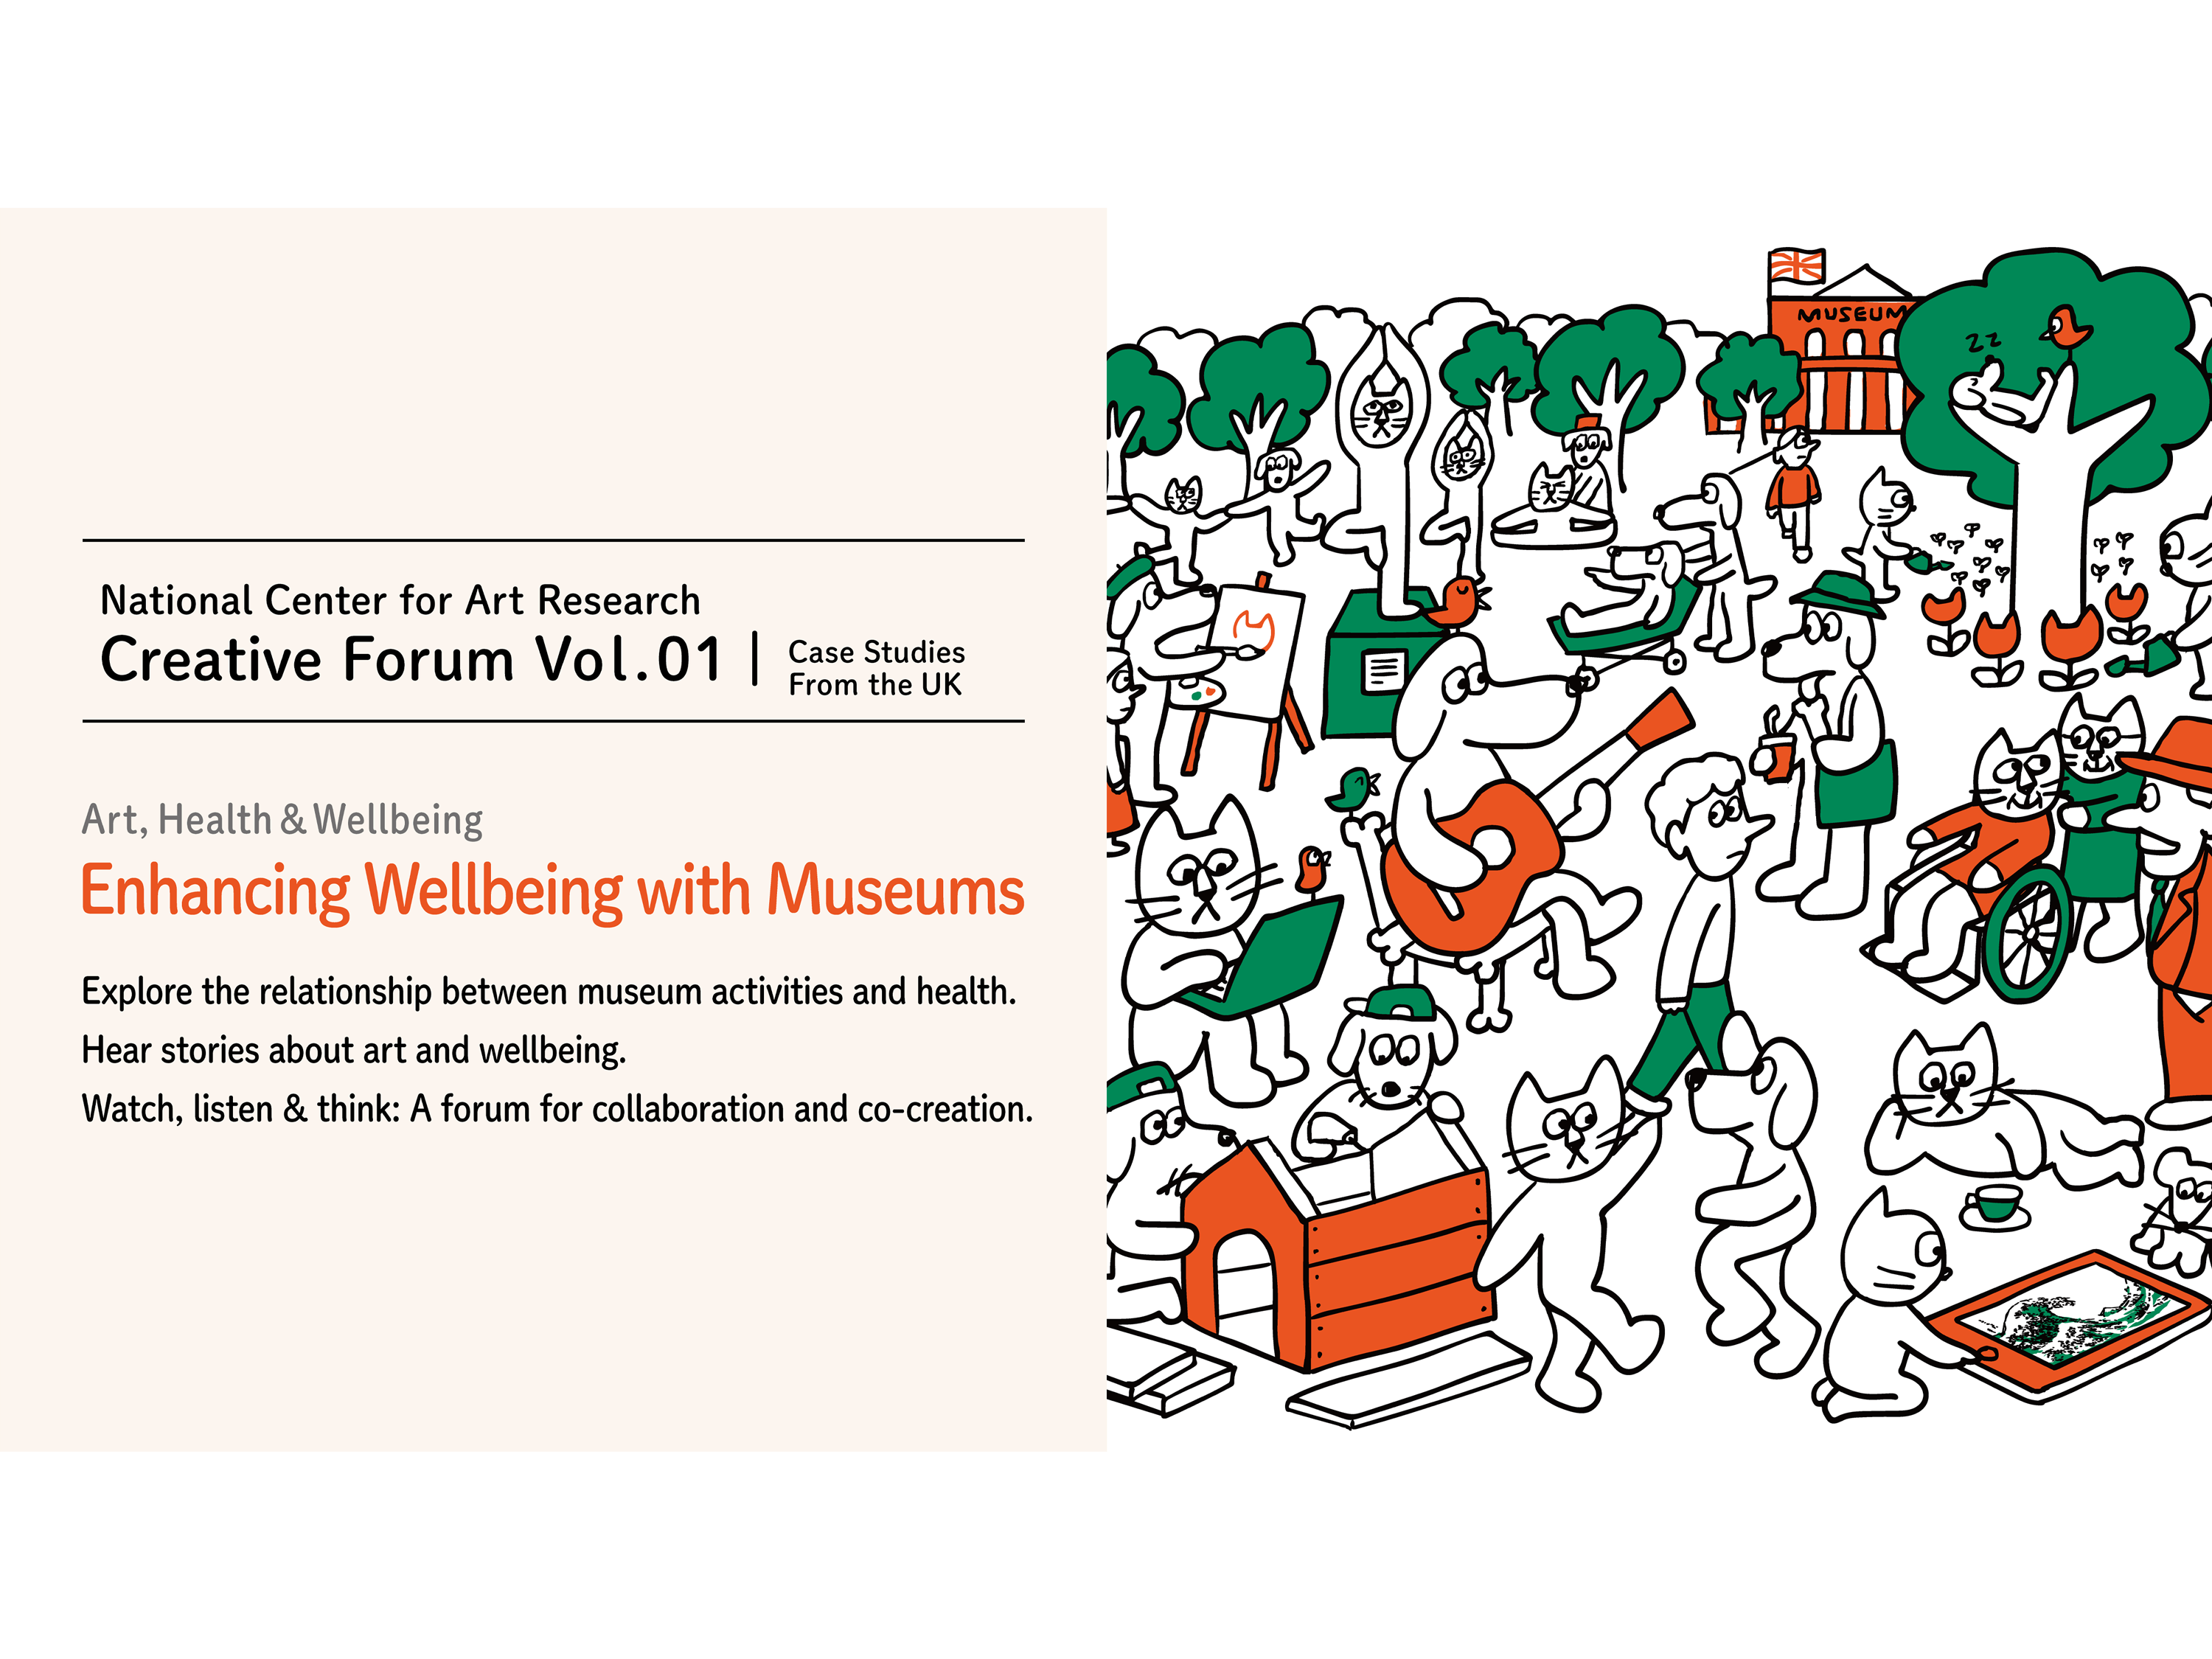 NCAR Creative ForumArt, Health & WellbeingEnhancing Wellbeing with Museums: Case Studies From the UK

